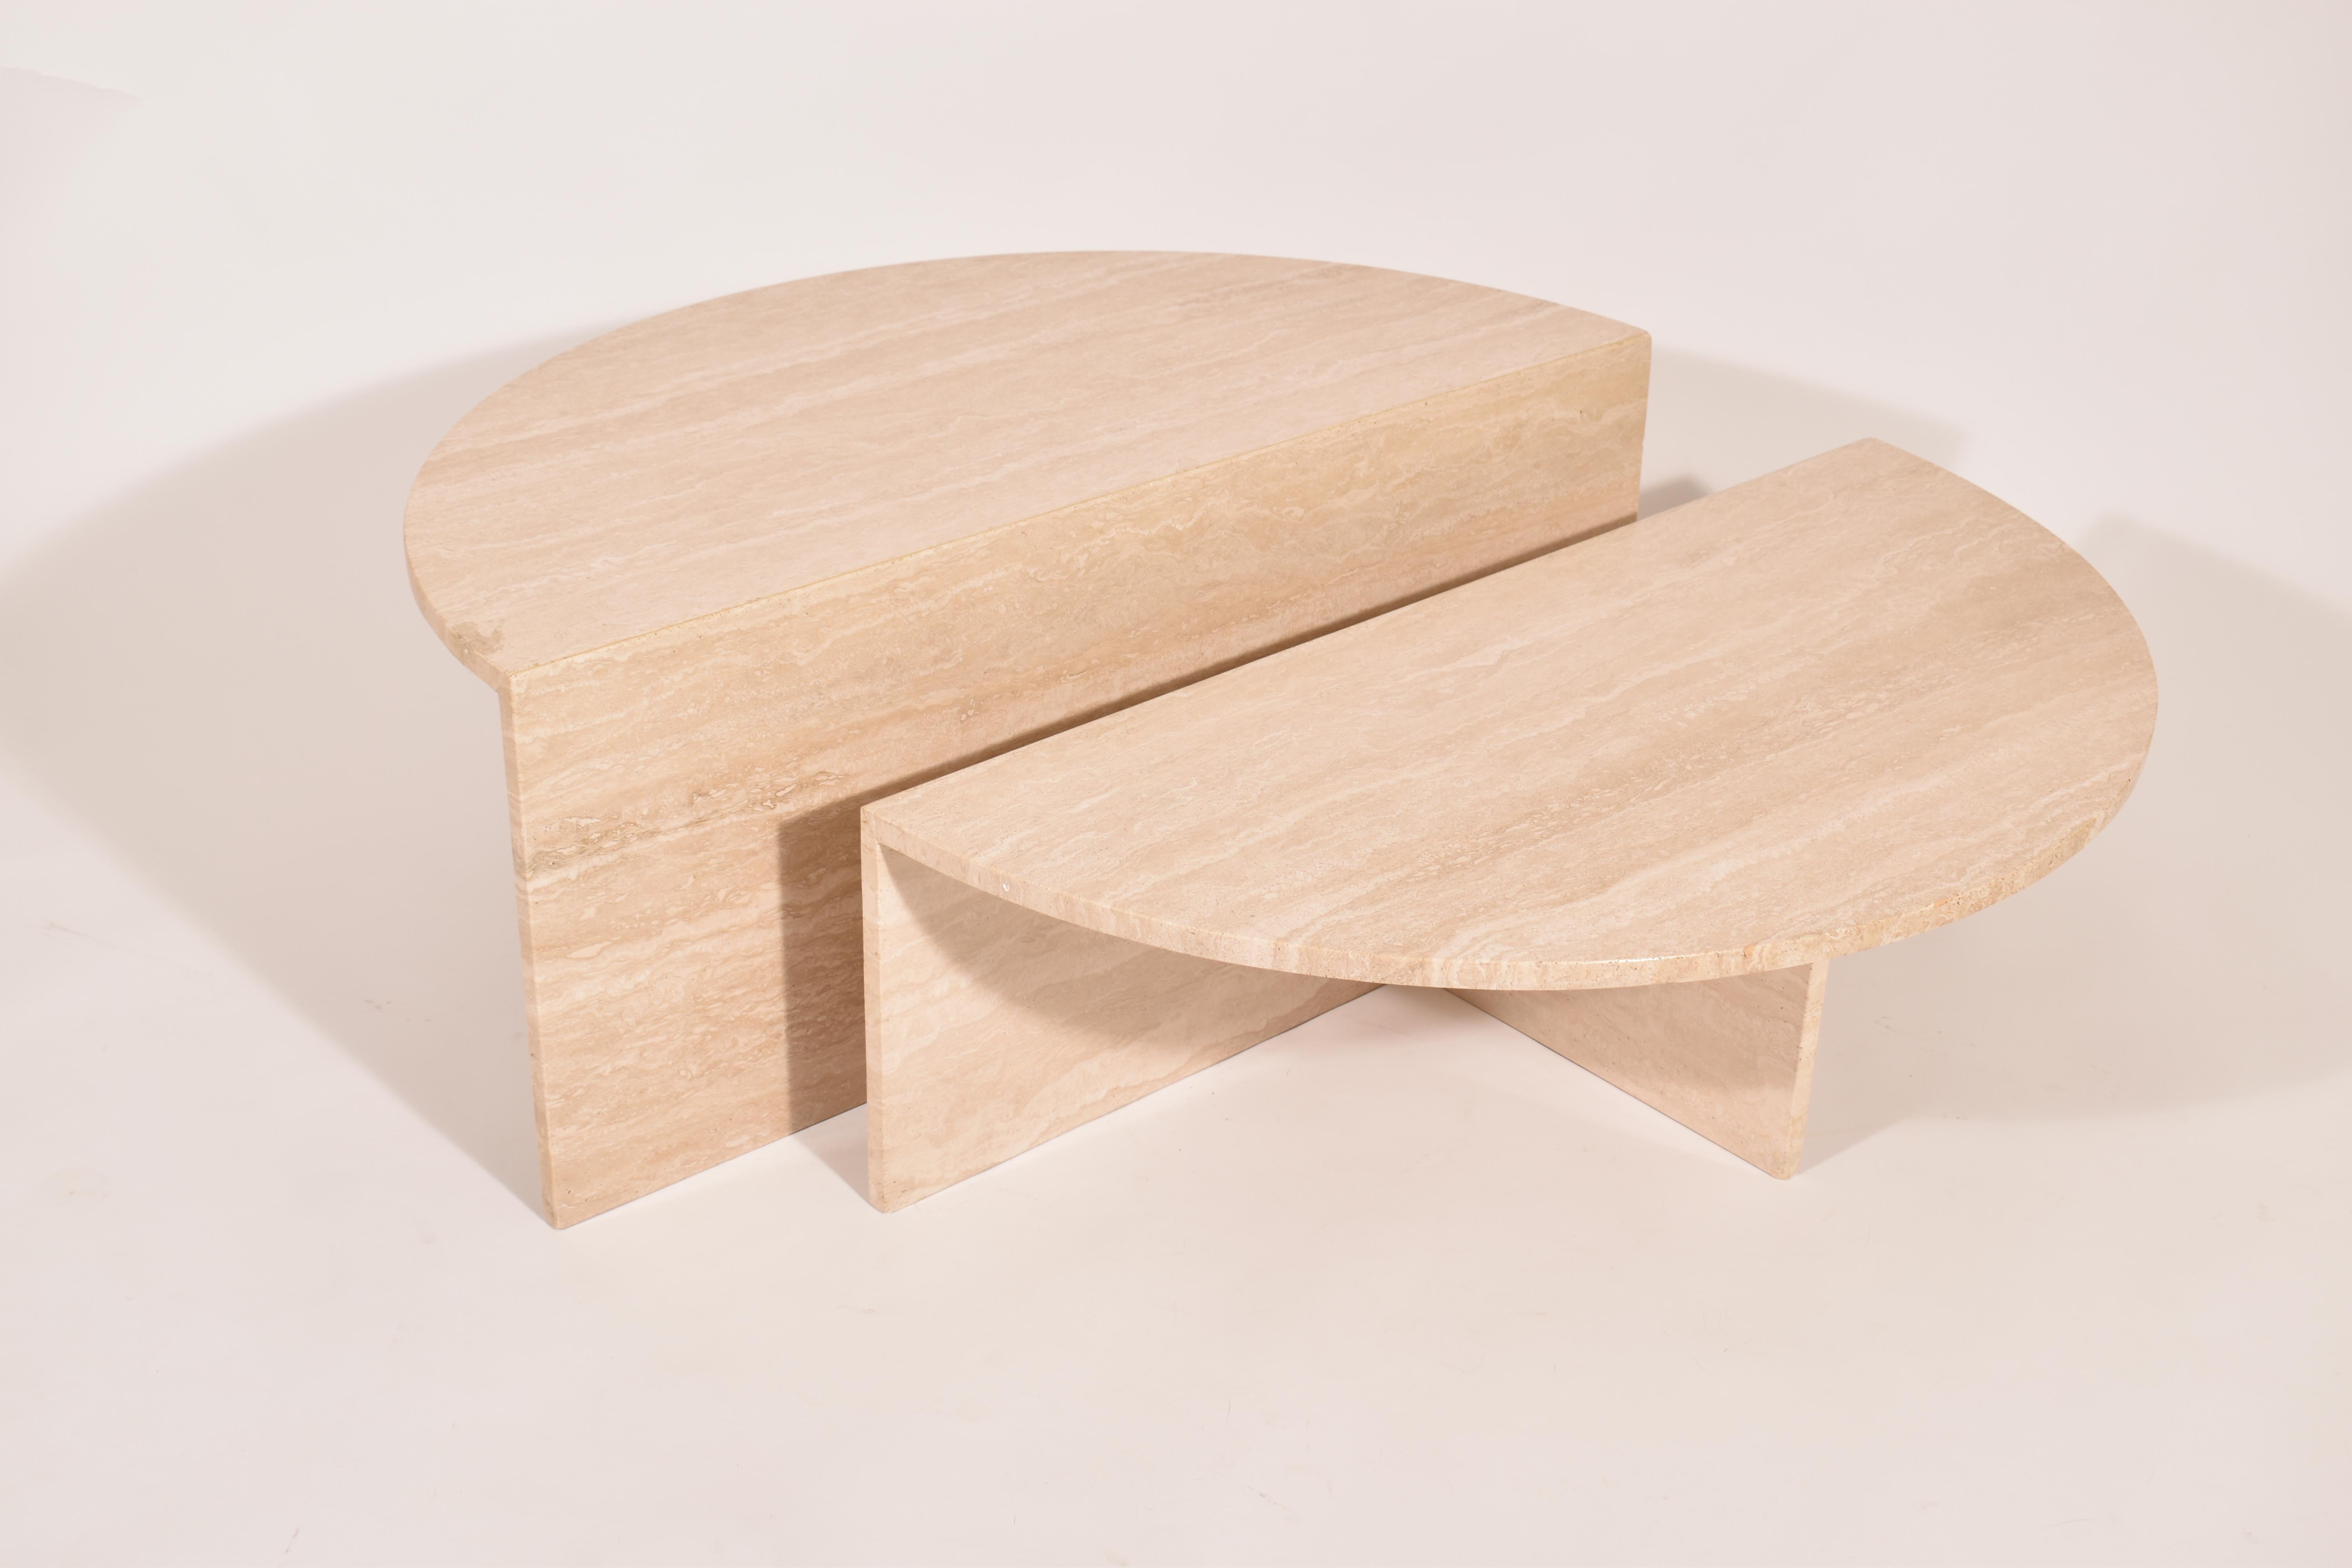 Set of two cream travertine coffee tables, made by Up & Up in Italy, between 1970 and 1980.
The half round tables have a different height ( 30 cm / 11.8'' ) ( 40 cm / 15.7''), so they can be used together (tight or loose), or separately, giving a